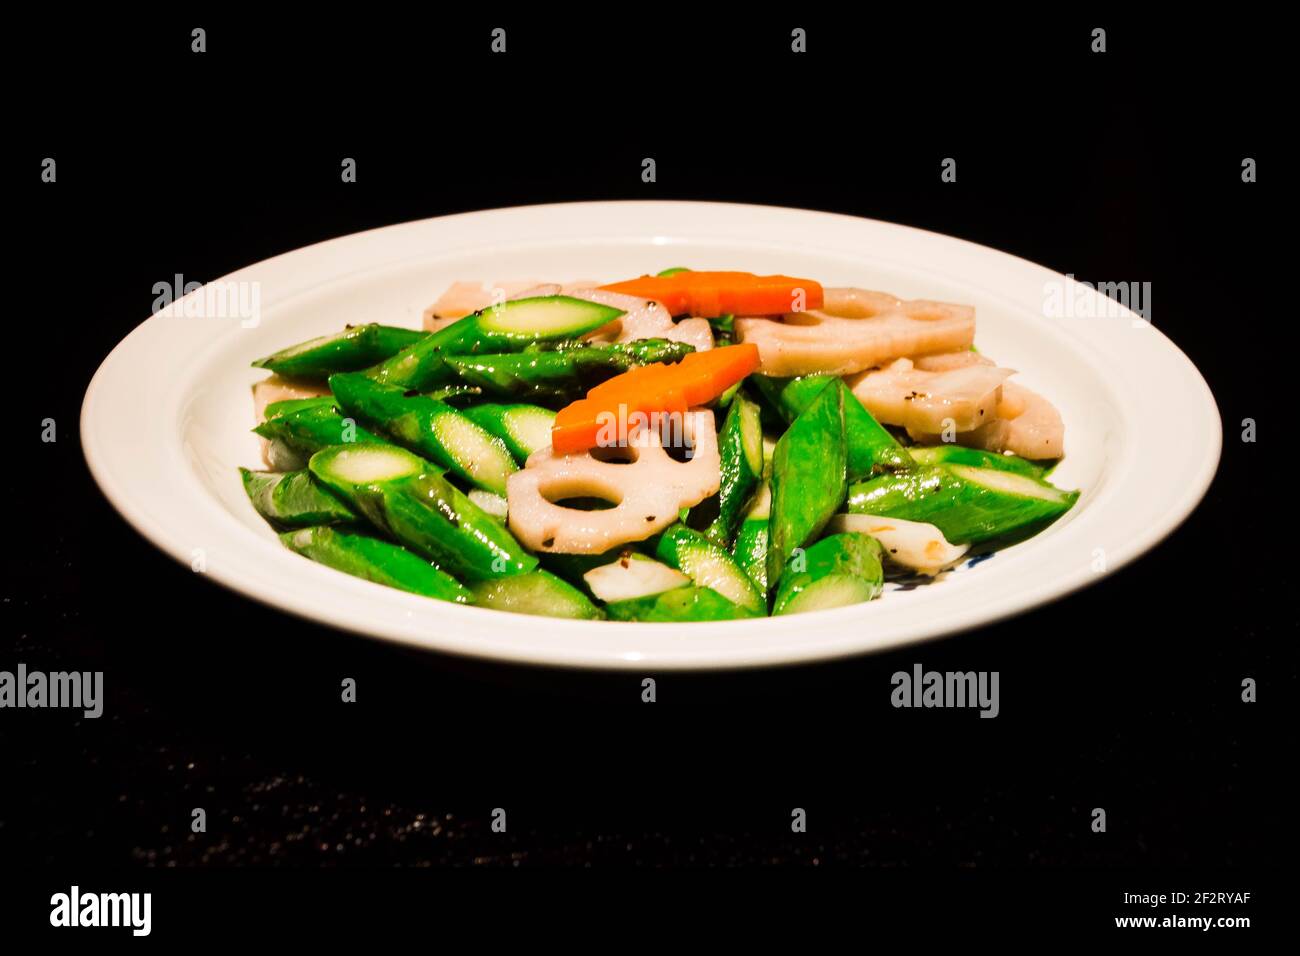 asparagus stir fried with lotus root and carrot serrved in a white plate Stock Photo